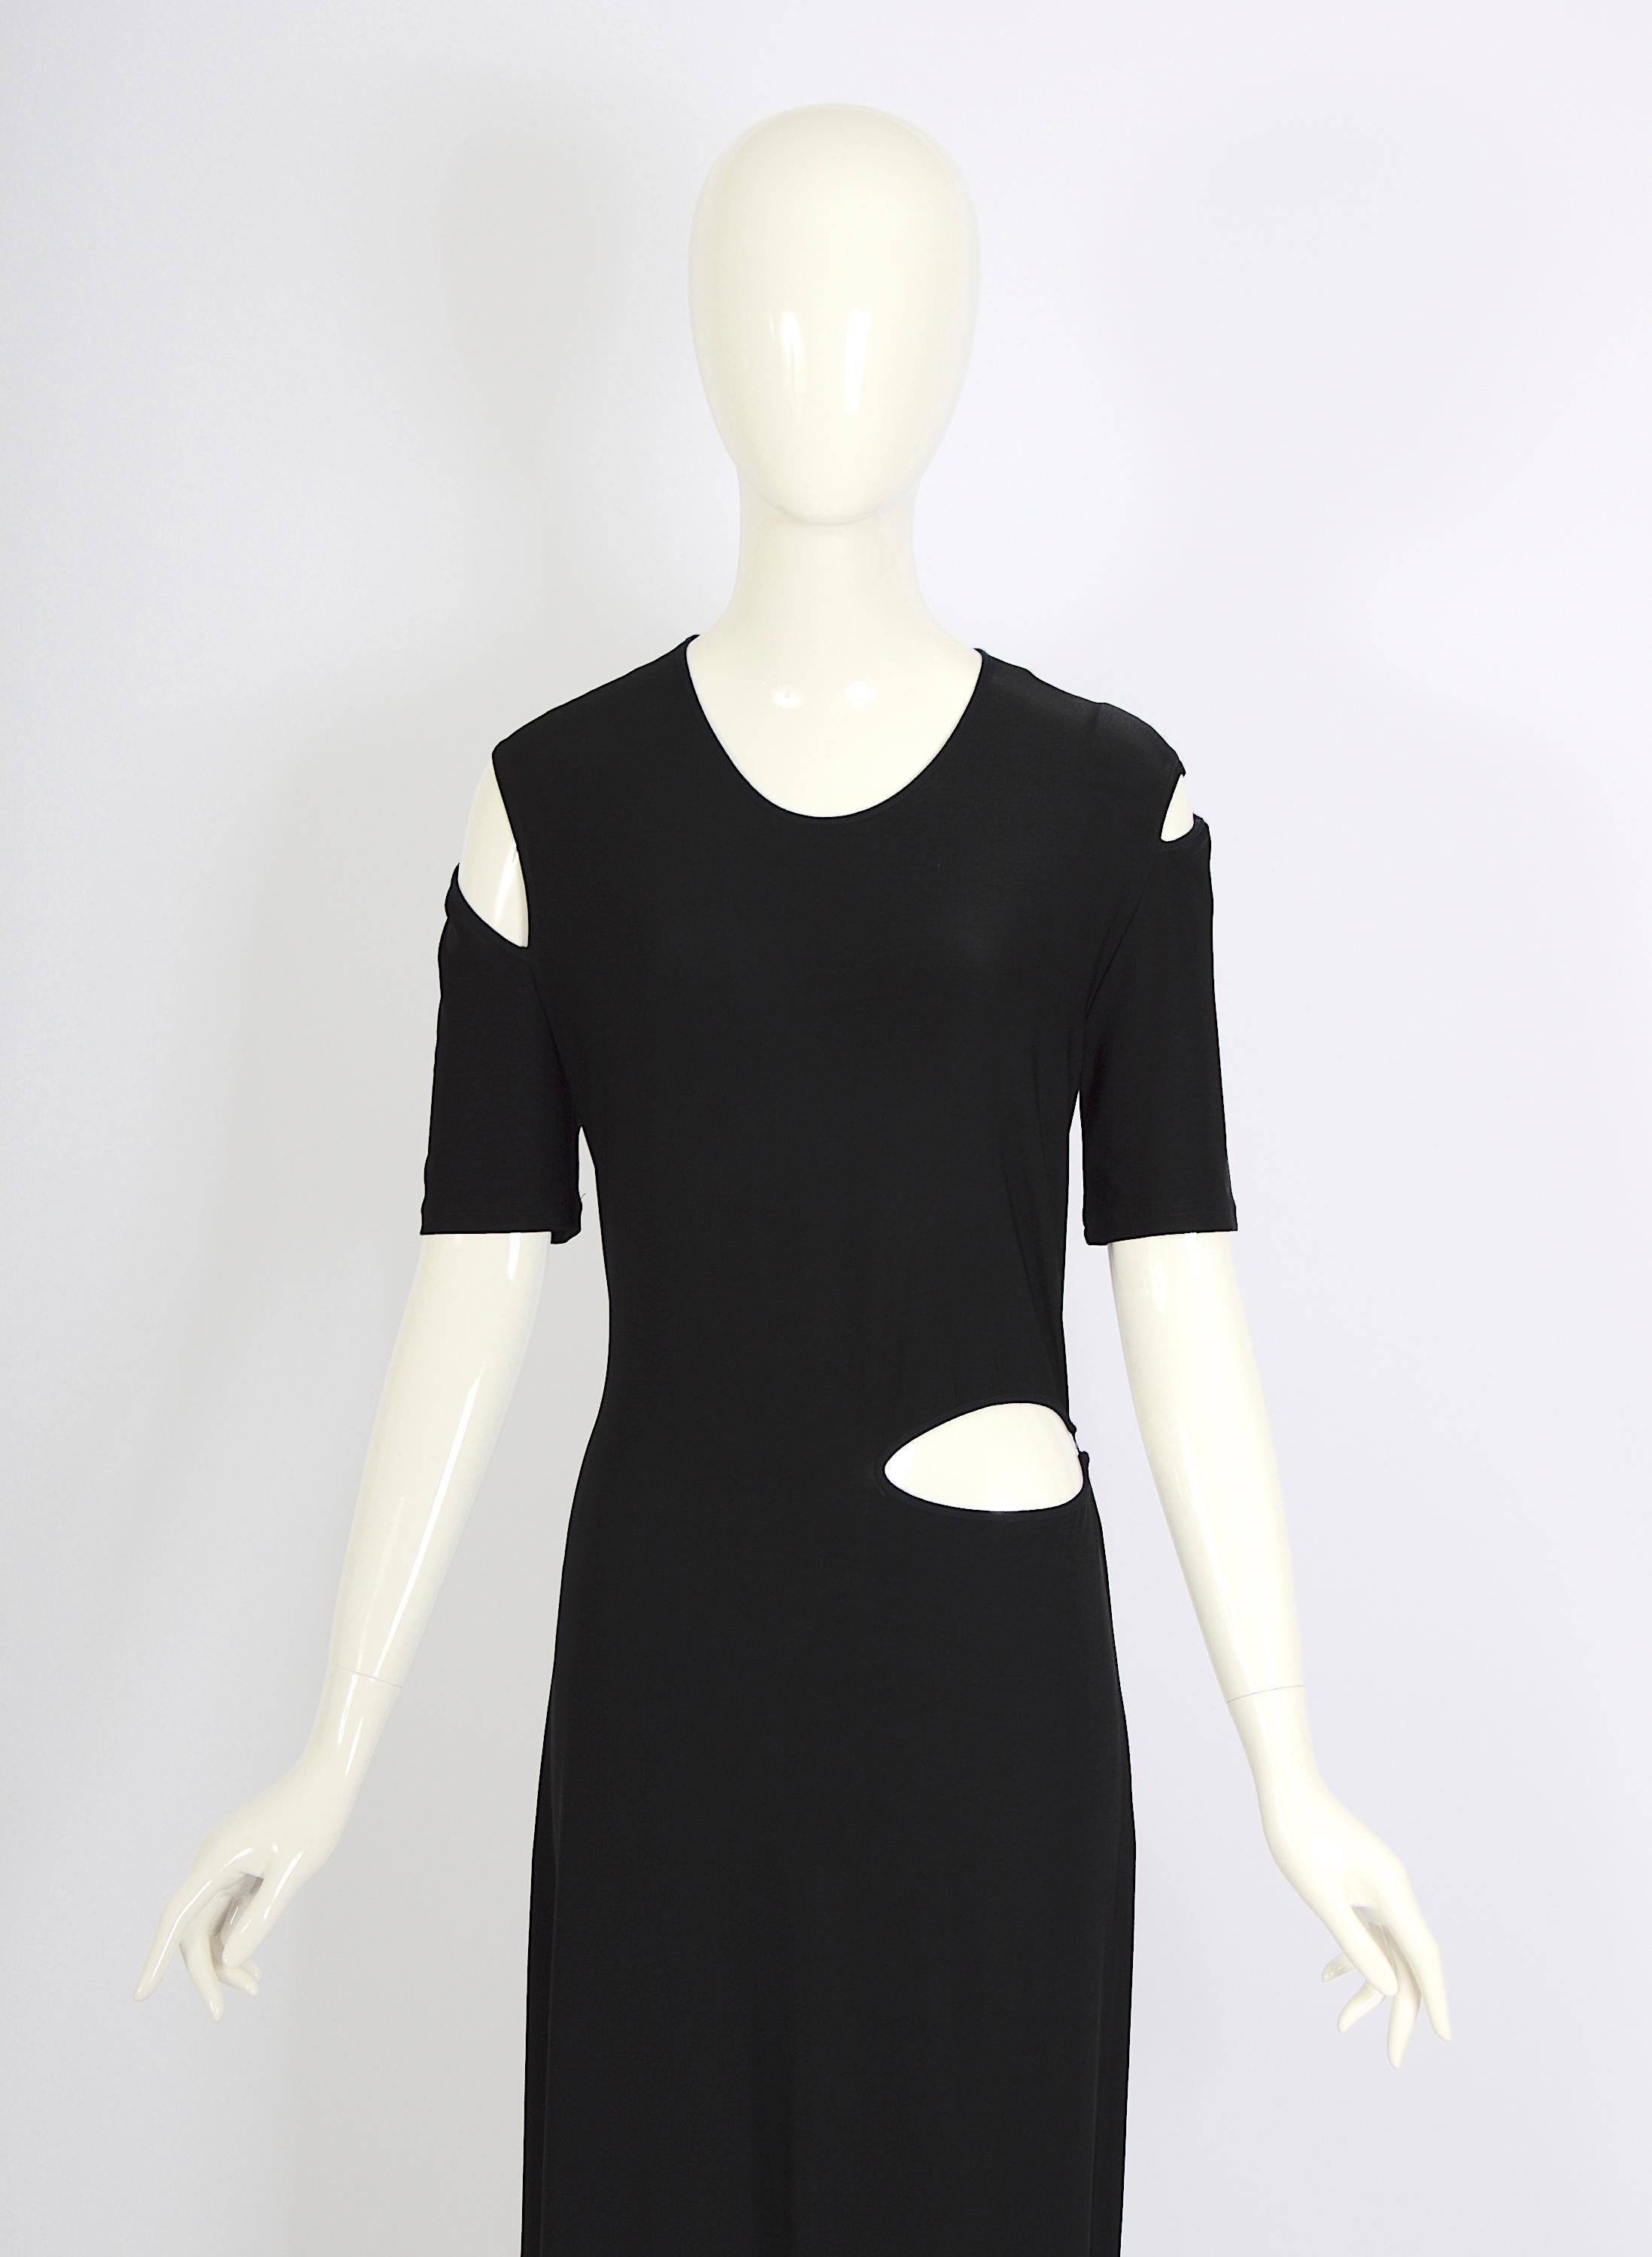 This exquisite long black jersey dress from the 1990s is a vintage piece by the renowned French designer Marcel Marongiu. Originally, the Marcel Marongiu were available at the prestigious Kashiyama Onward boutique on the Boulevard Saint Germain in